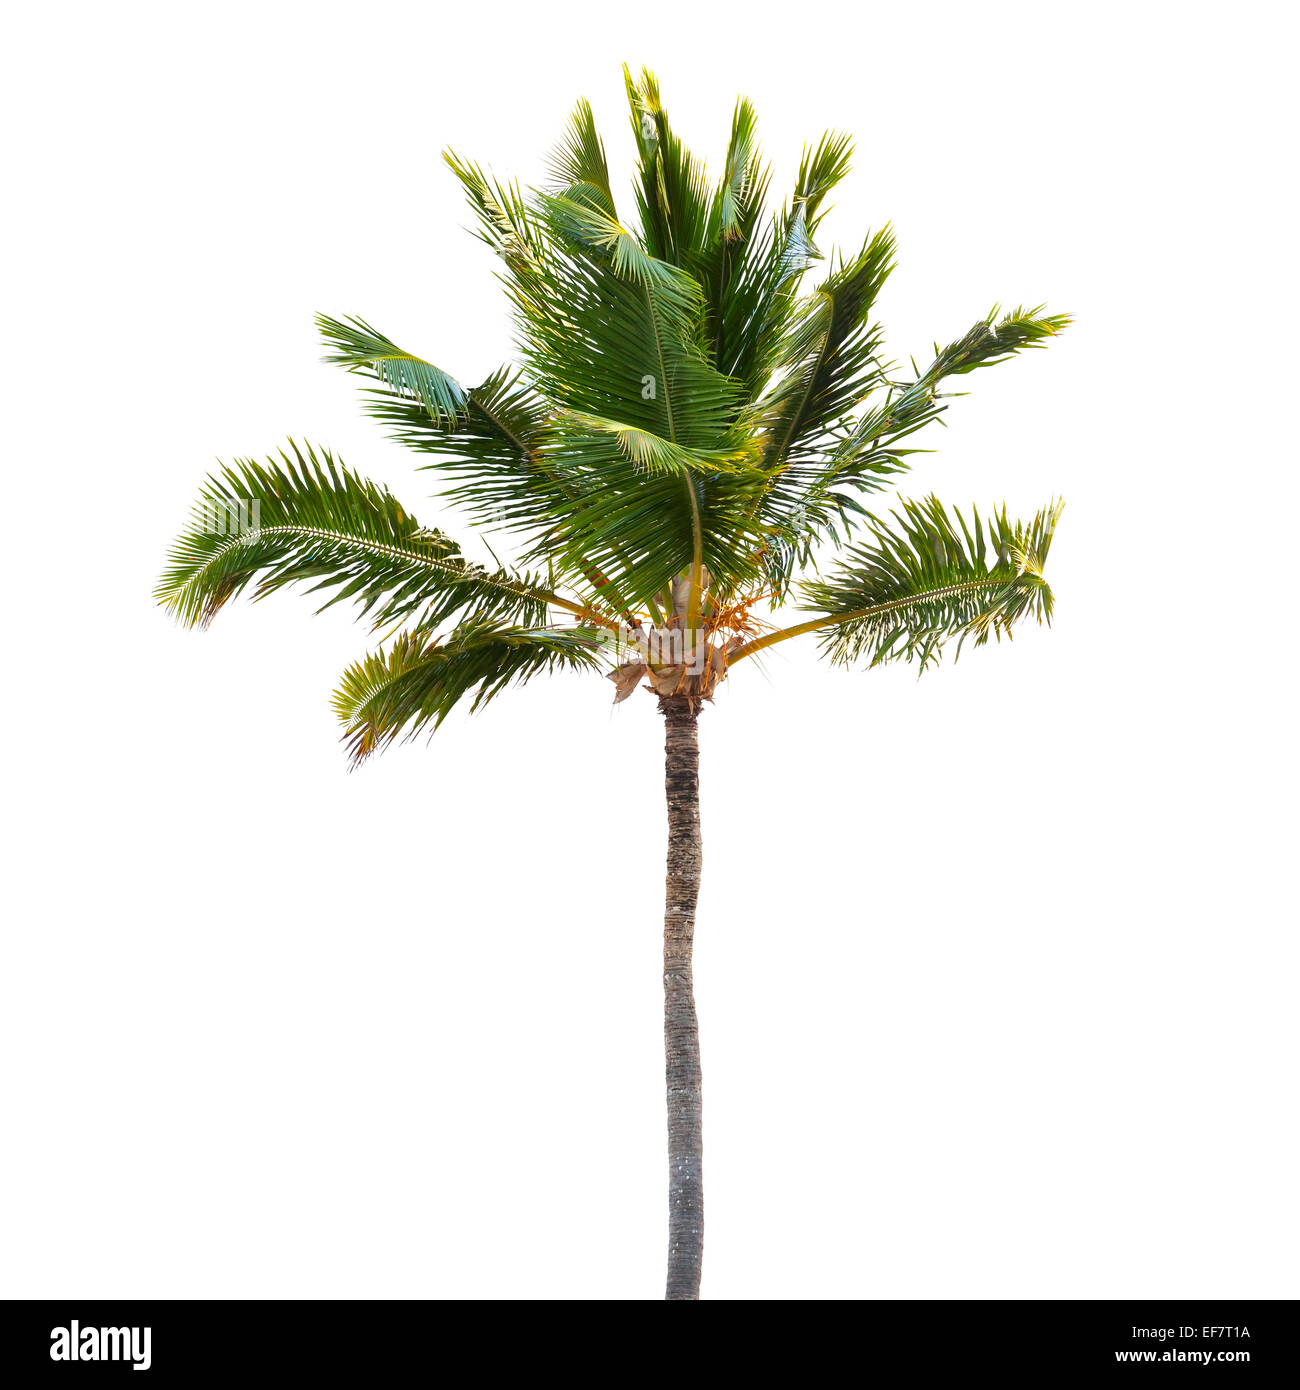 Coconut palm tree isolated on white background Stock Photo